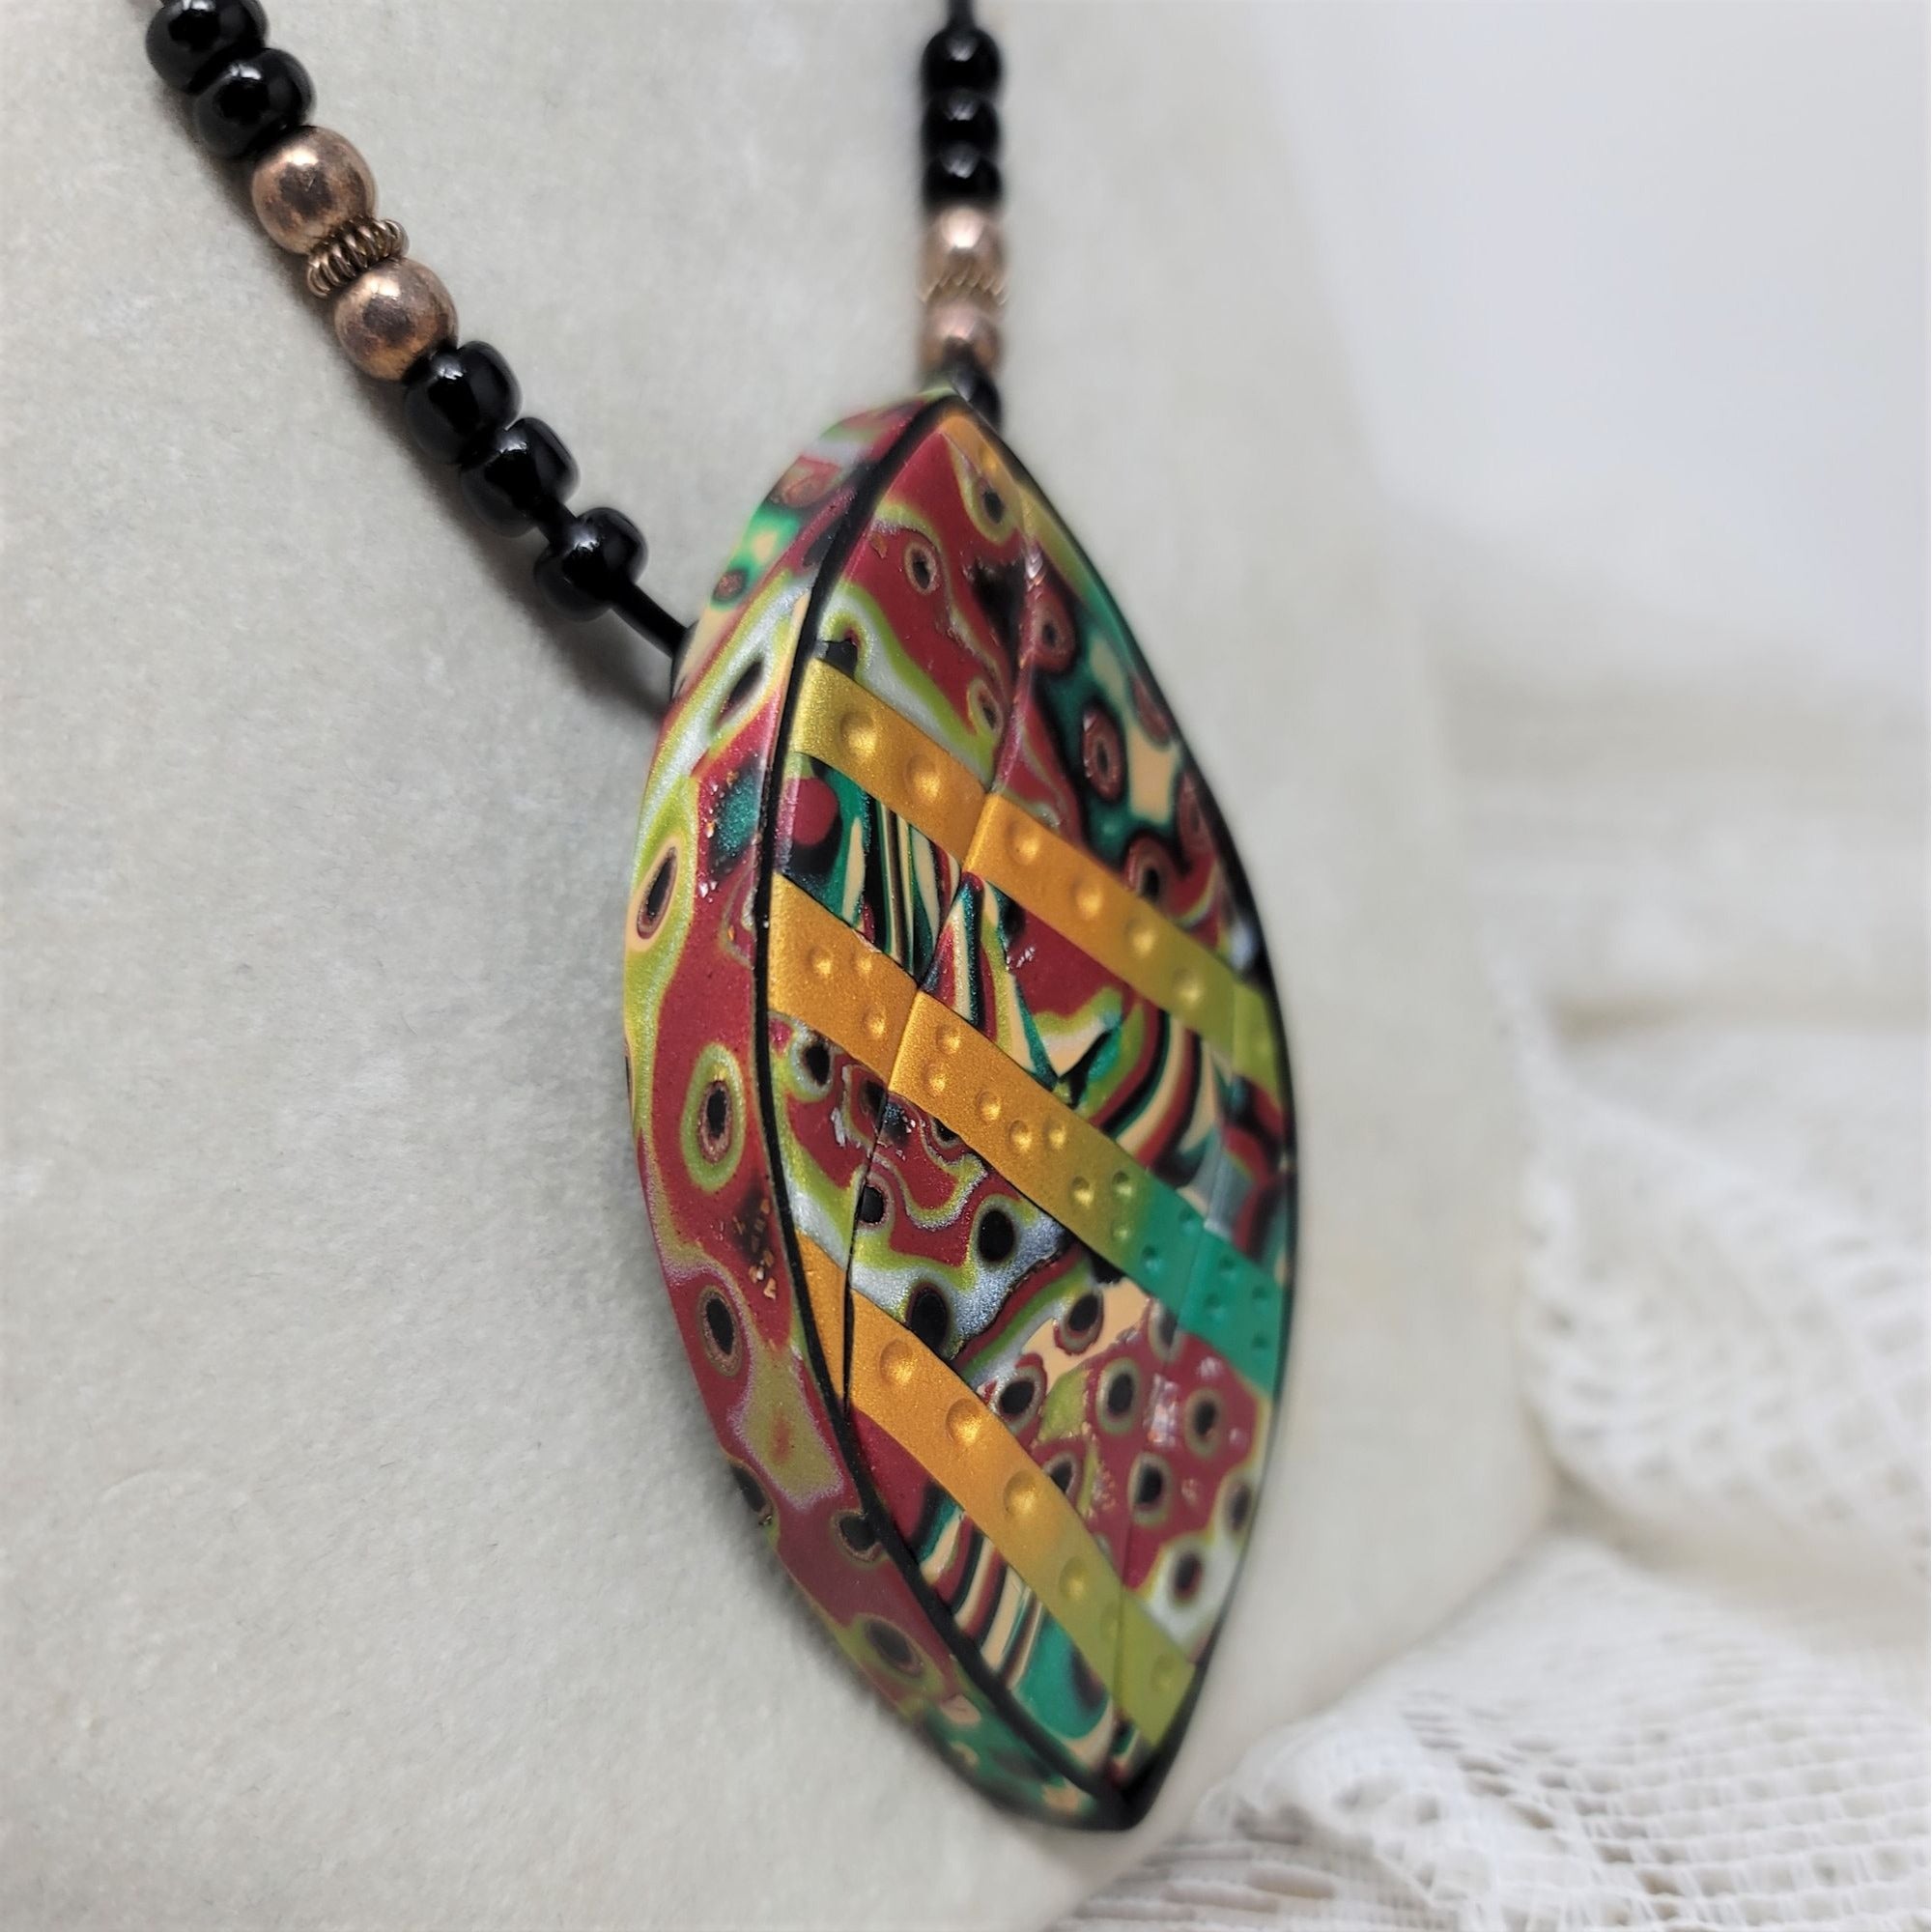 Modern Clay Colorful Necklace w/ Black Cord